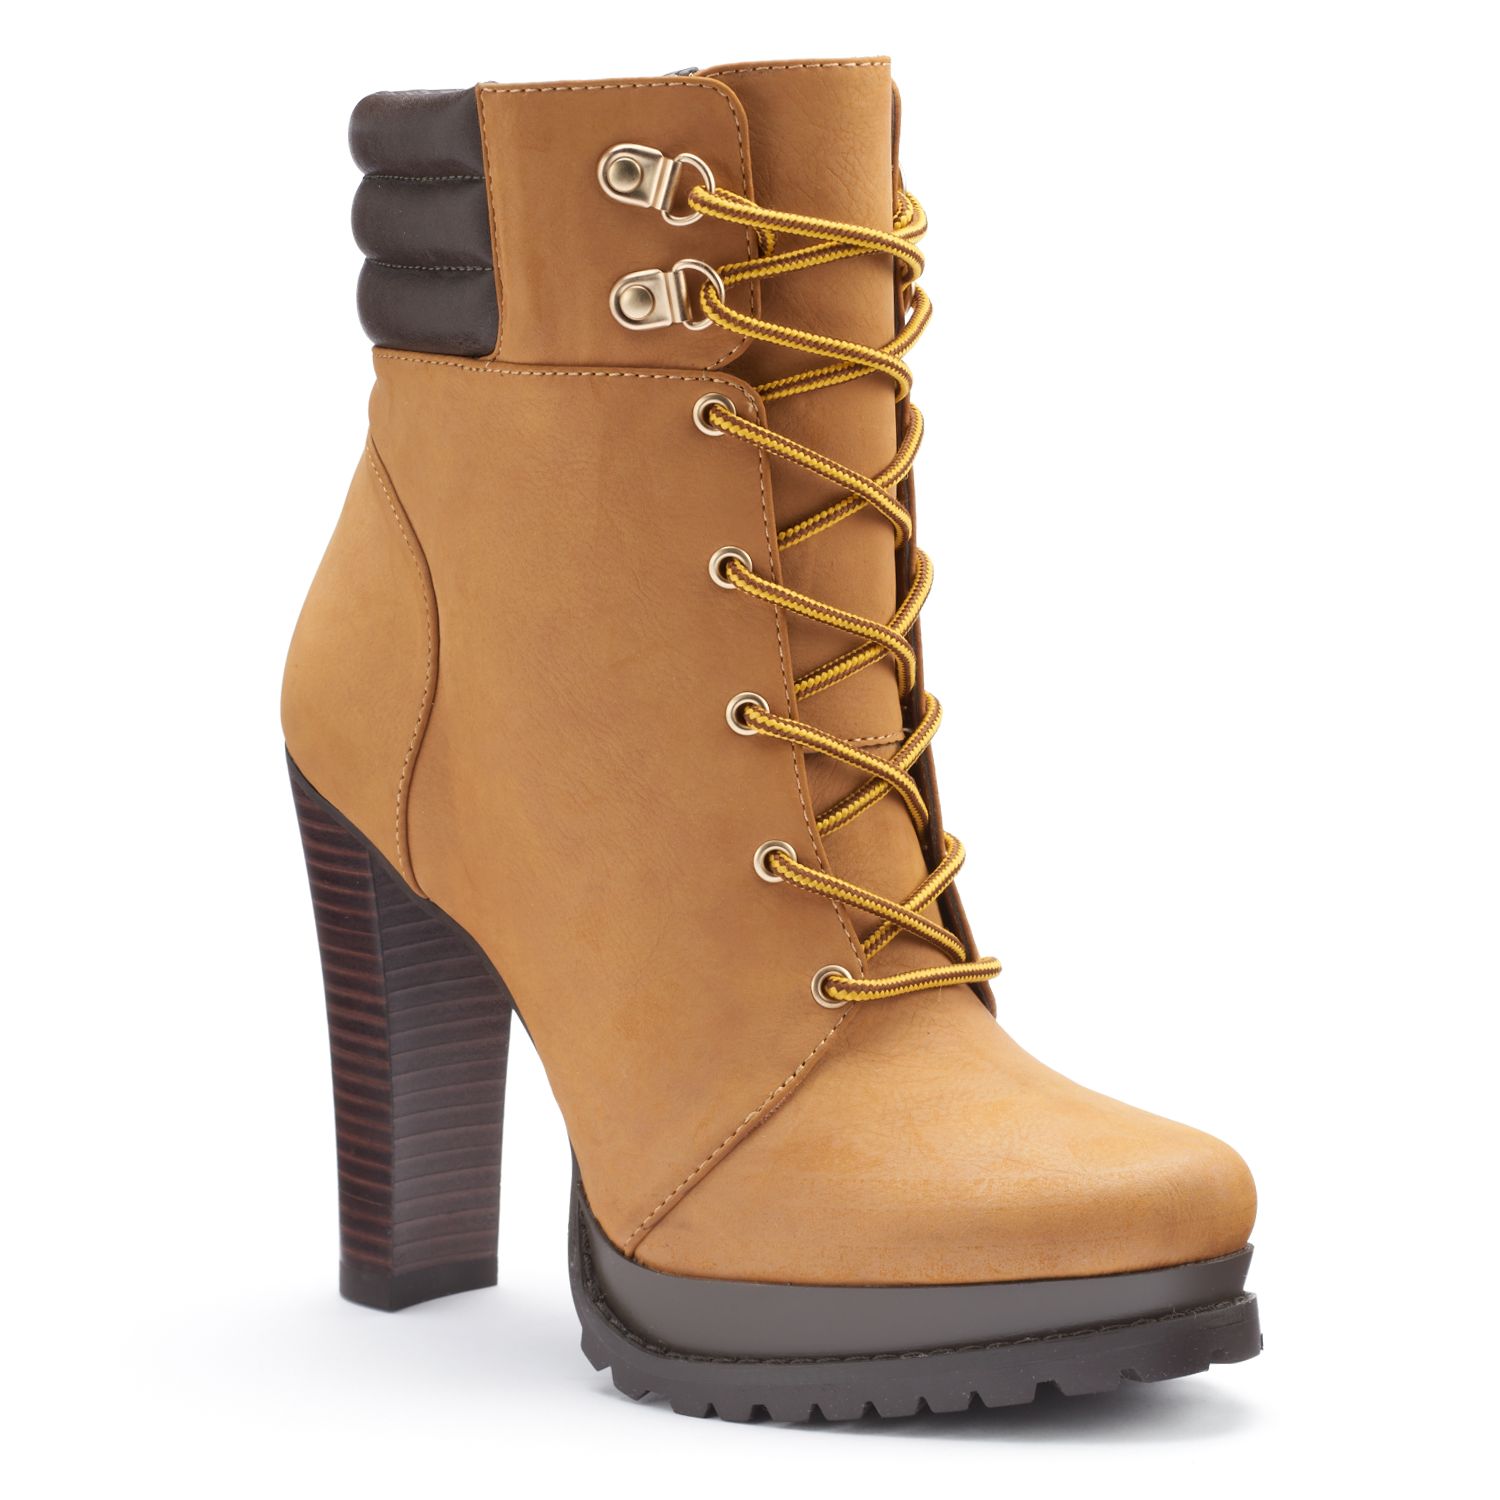 women's work ankle boots